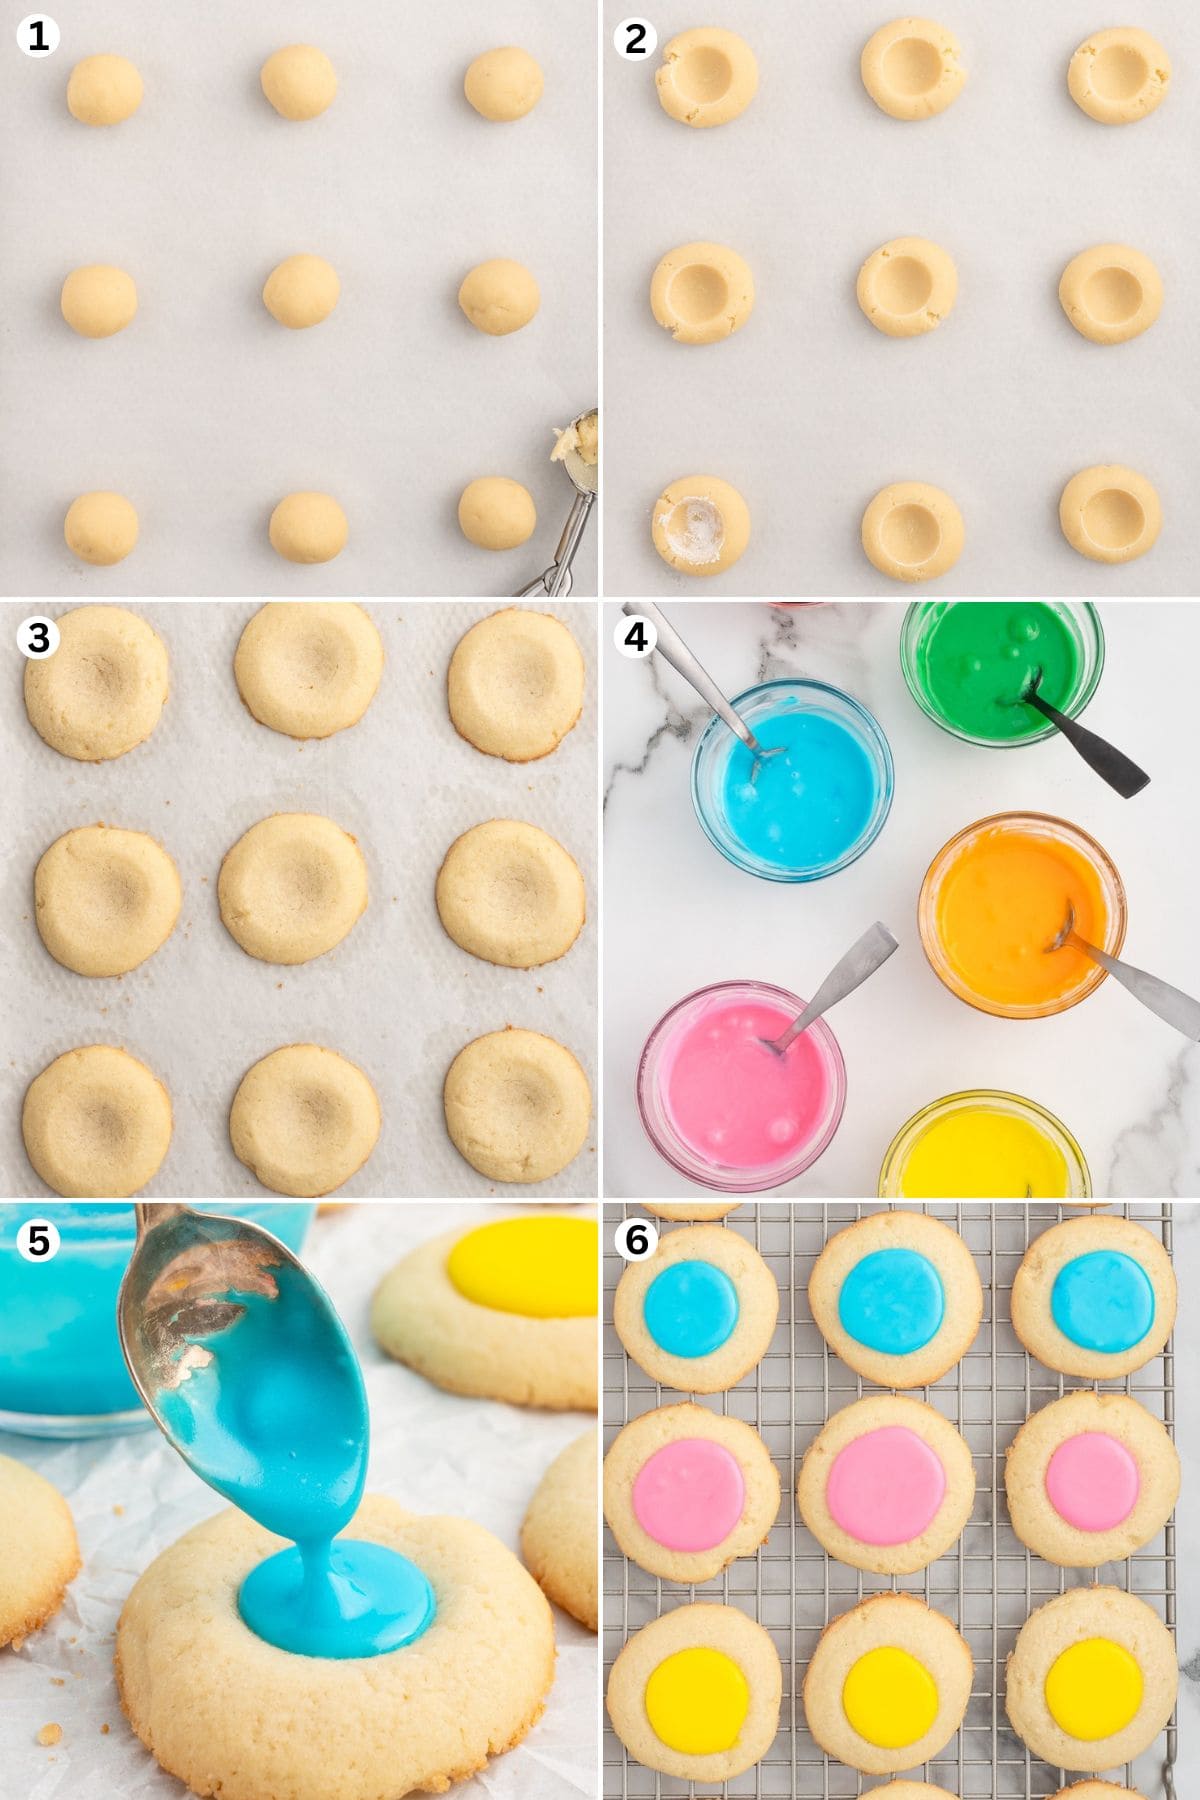 Scoop out tablespoons of chilled dough and roll them into smooth balls. Press an indent into the center of each dough ball. Bake. Prepare the icing. Use a small spoon to fill the center of the thumbprint cookies. Let it cool.